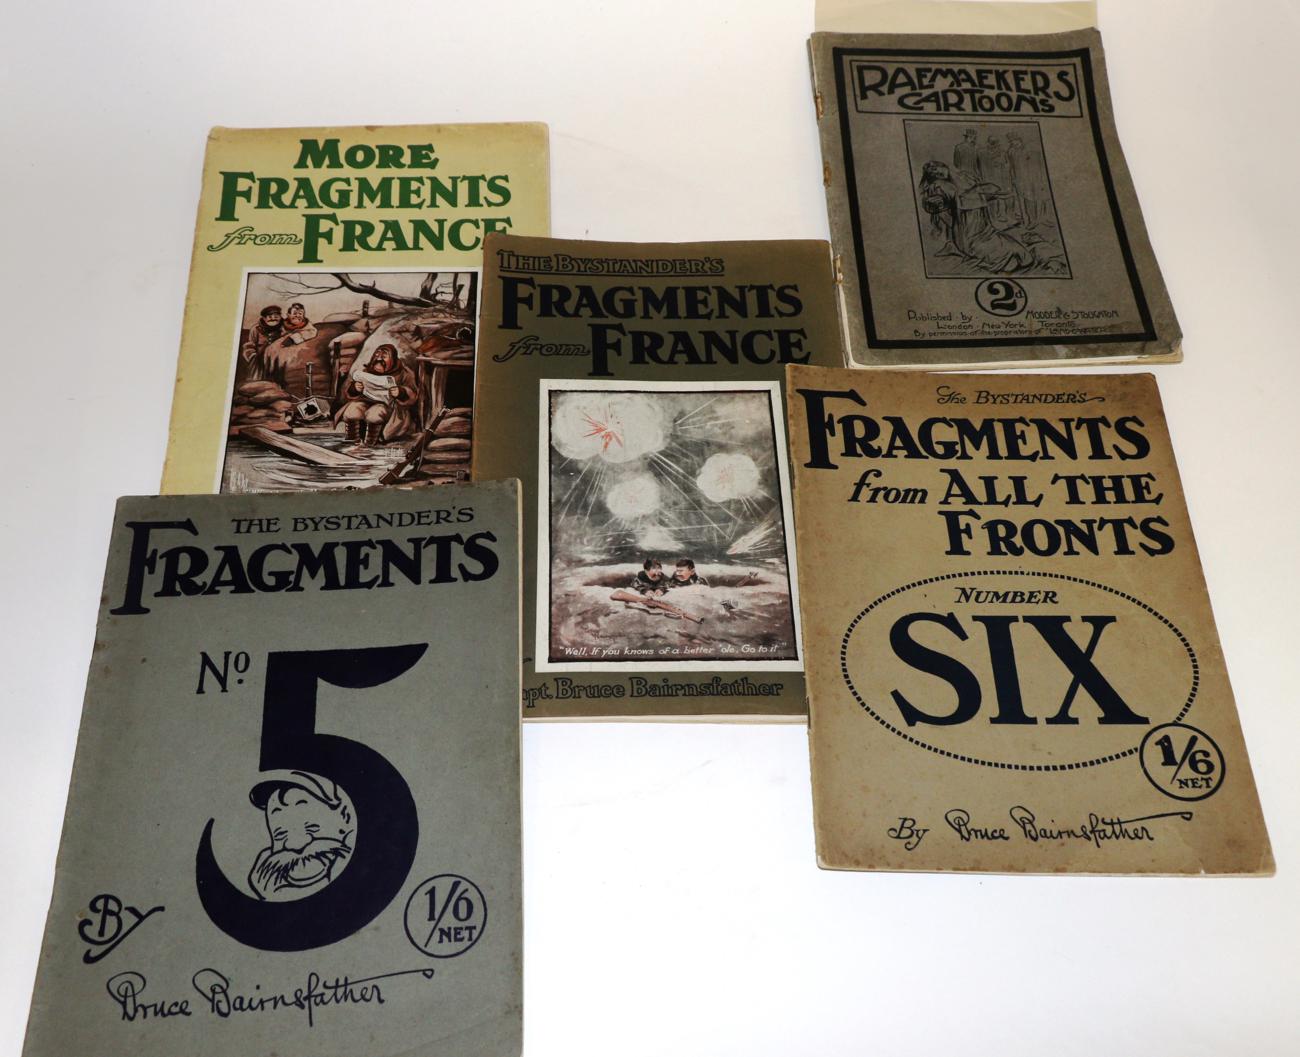 Bairnsfather (Capt. Bruce) Fragments from France, [c.1915], London, The Bystander, four 4to booklets